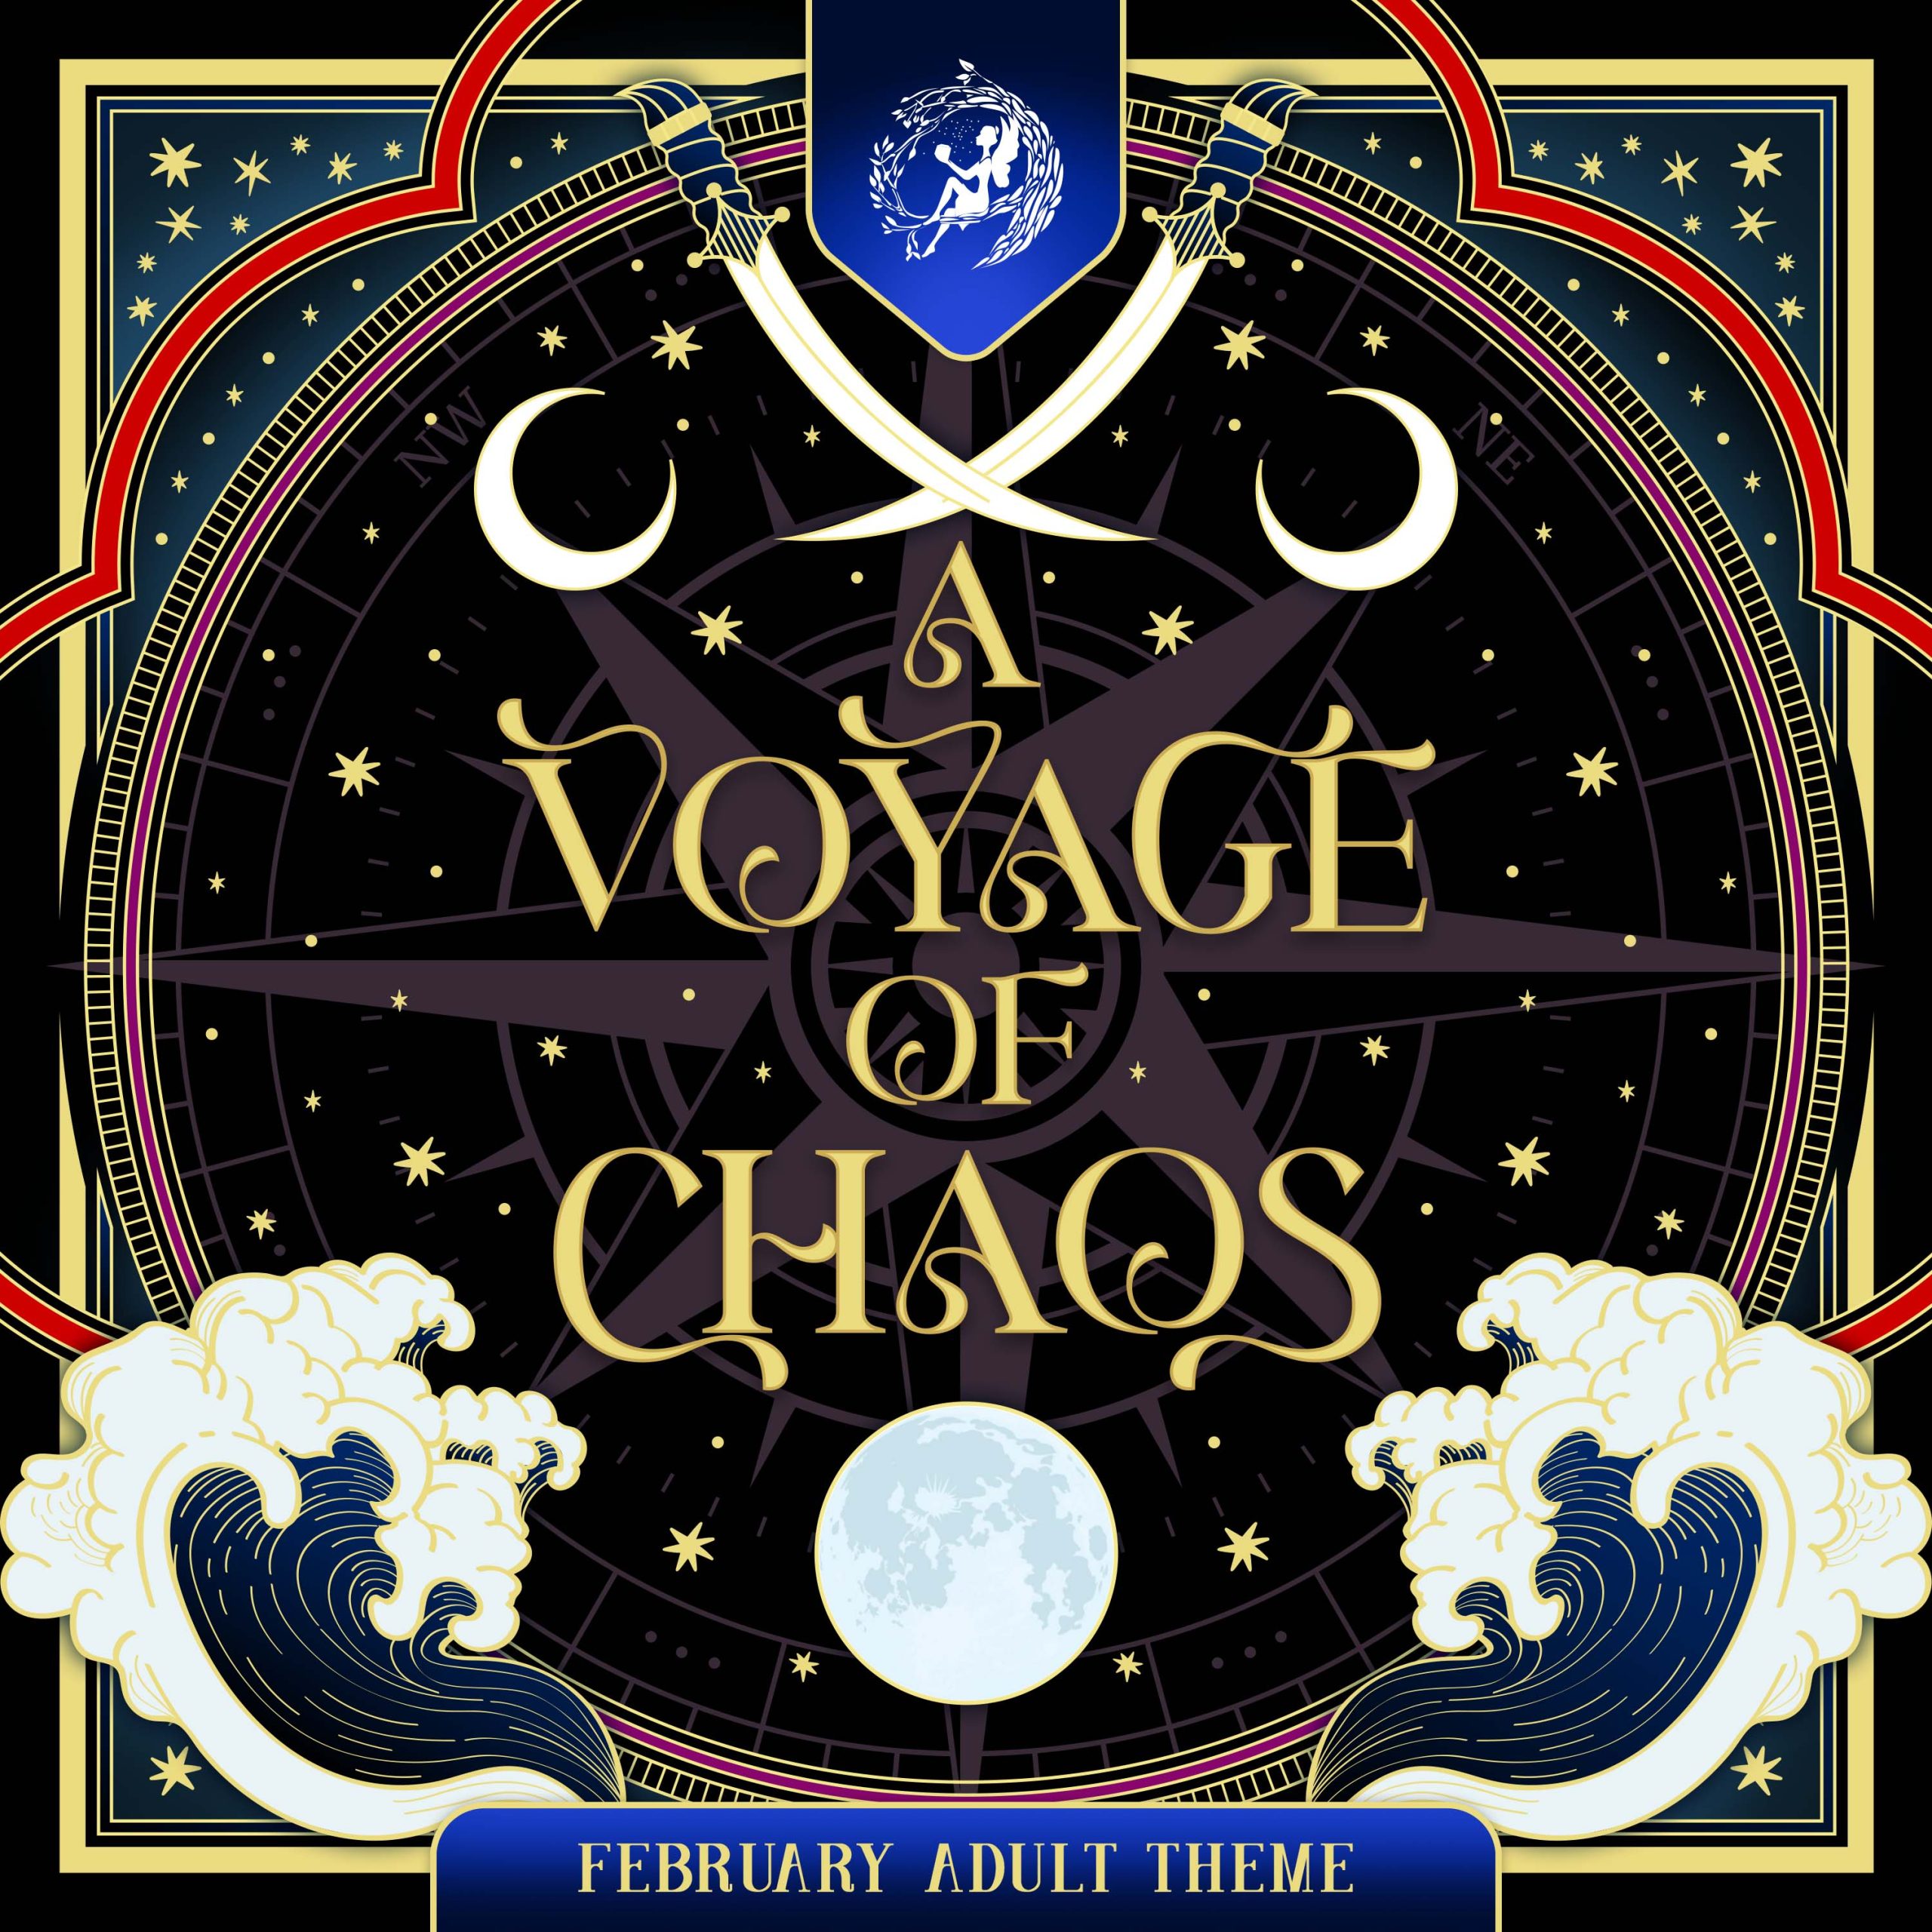 February Adult Theme: A VOYAGE OF CHAOS